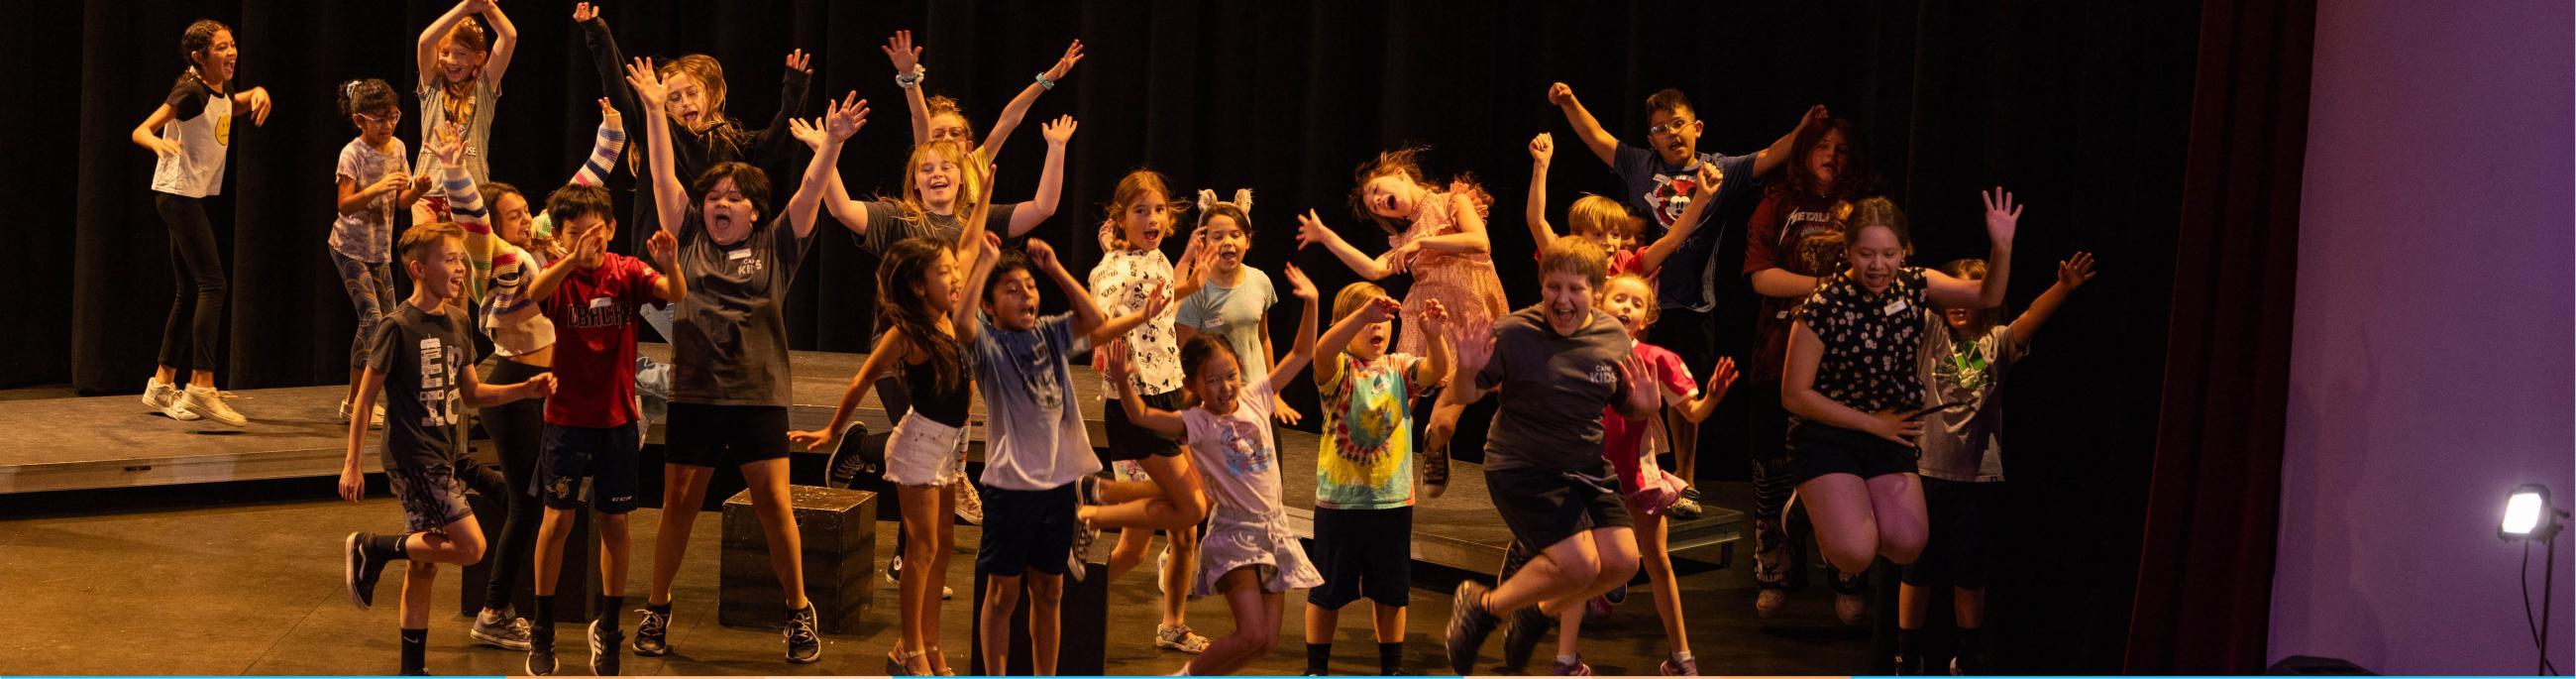 A group of youth on the theatre stage, all in a moment where they are jumping up in the air and making silly faces